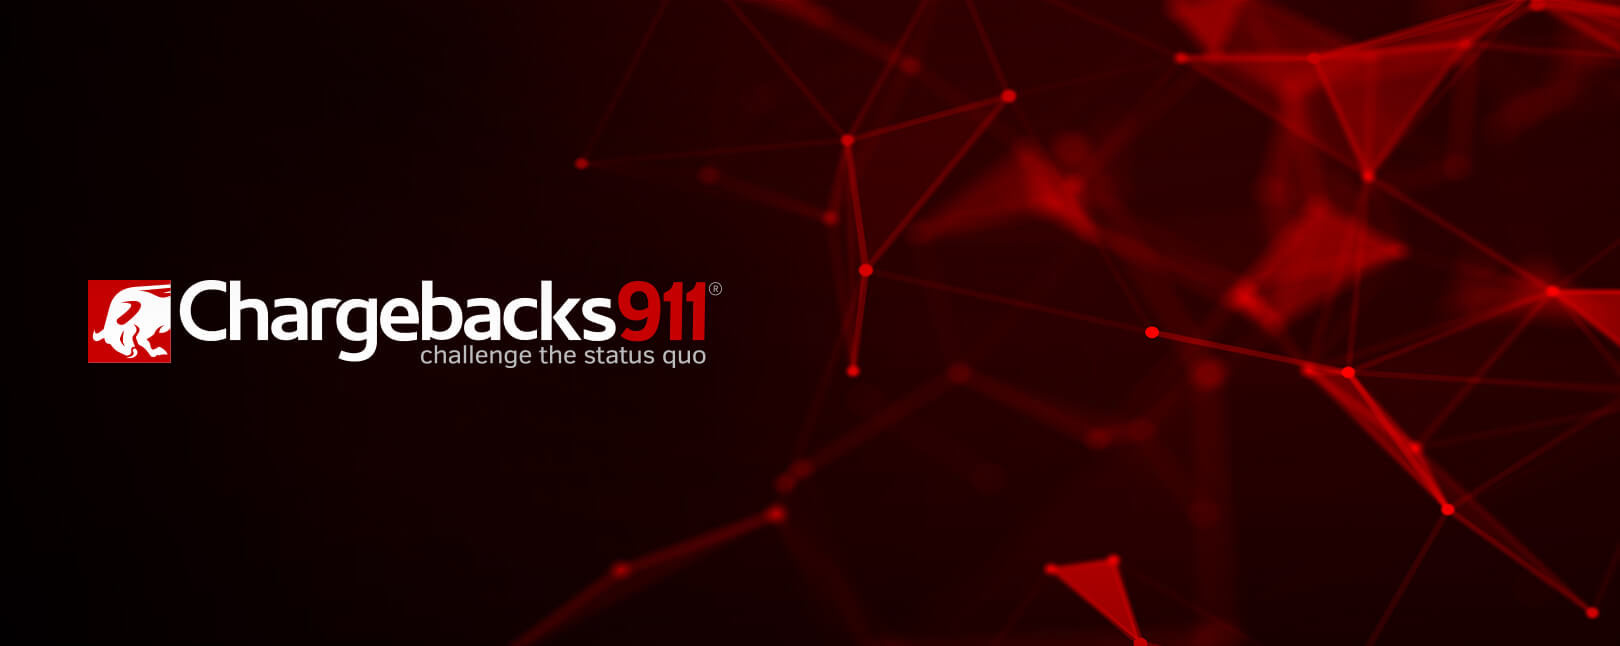 Chargebacks911 Achieves Platform Milestone of 1000 Integrated Data Connections and Ingestible File Types